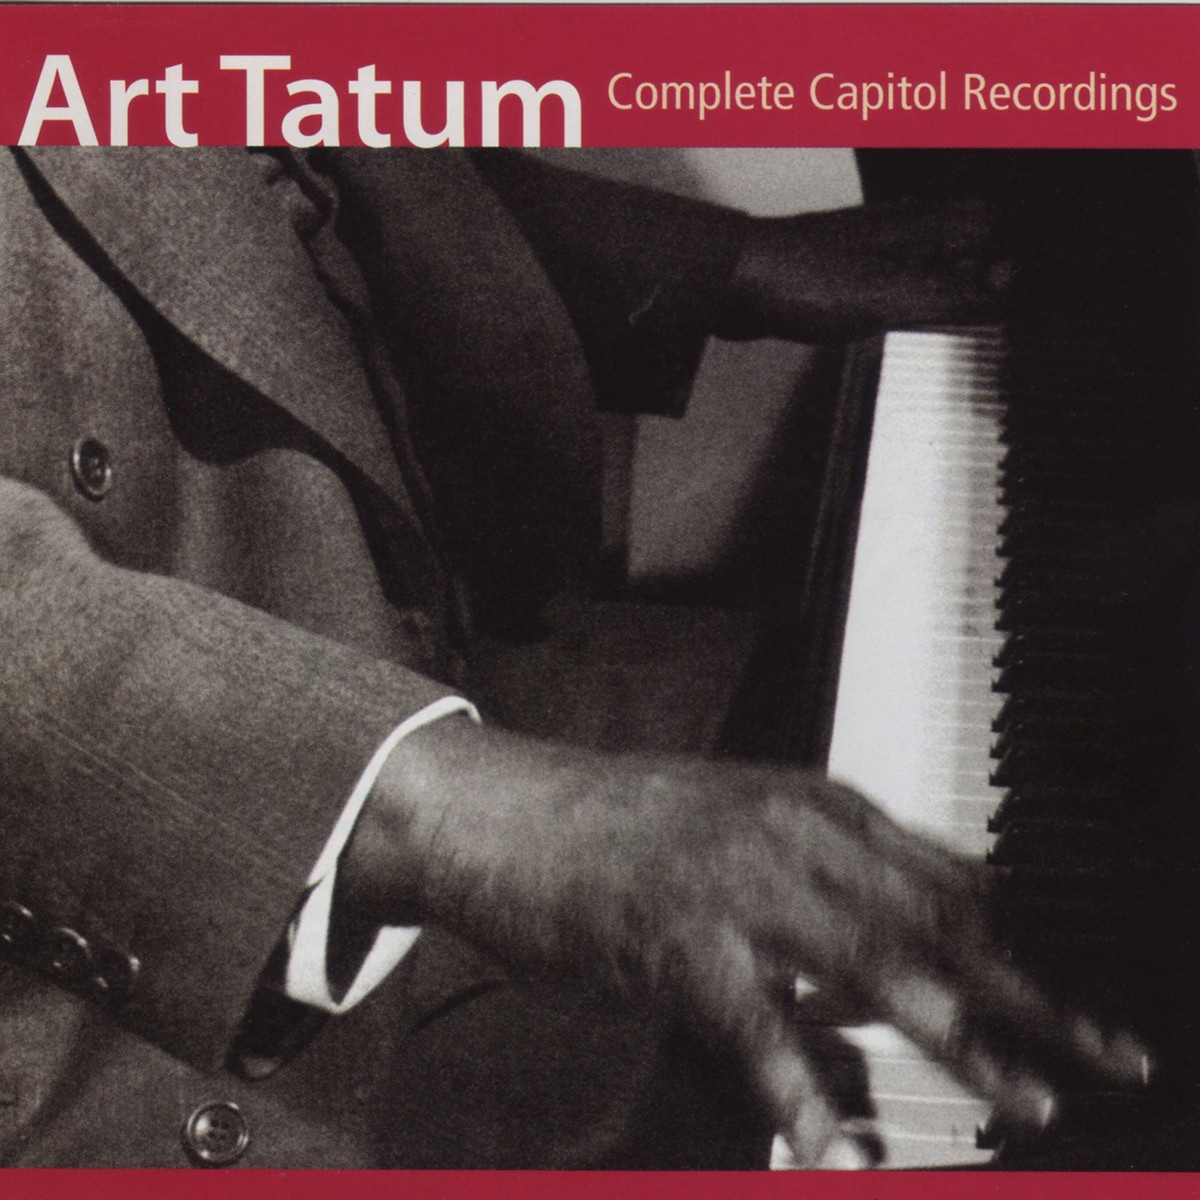 Promotional Interview With Art Tatum, Paul Weston and You